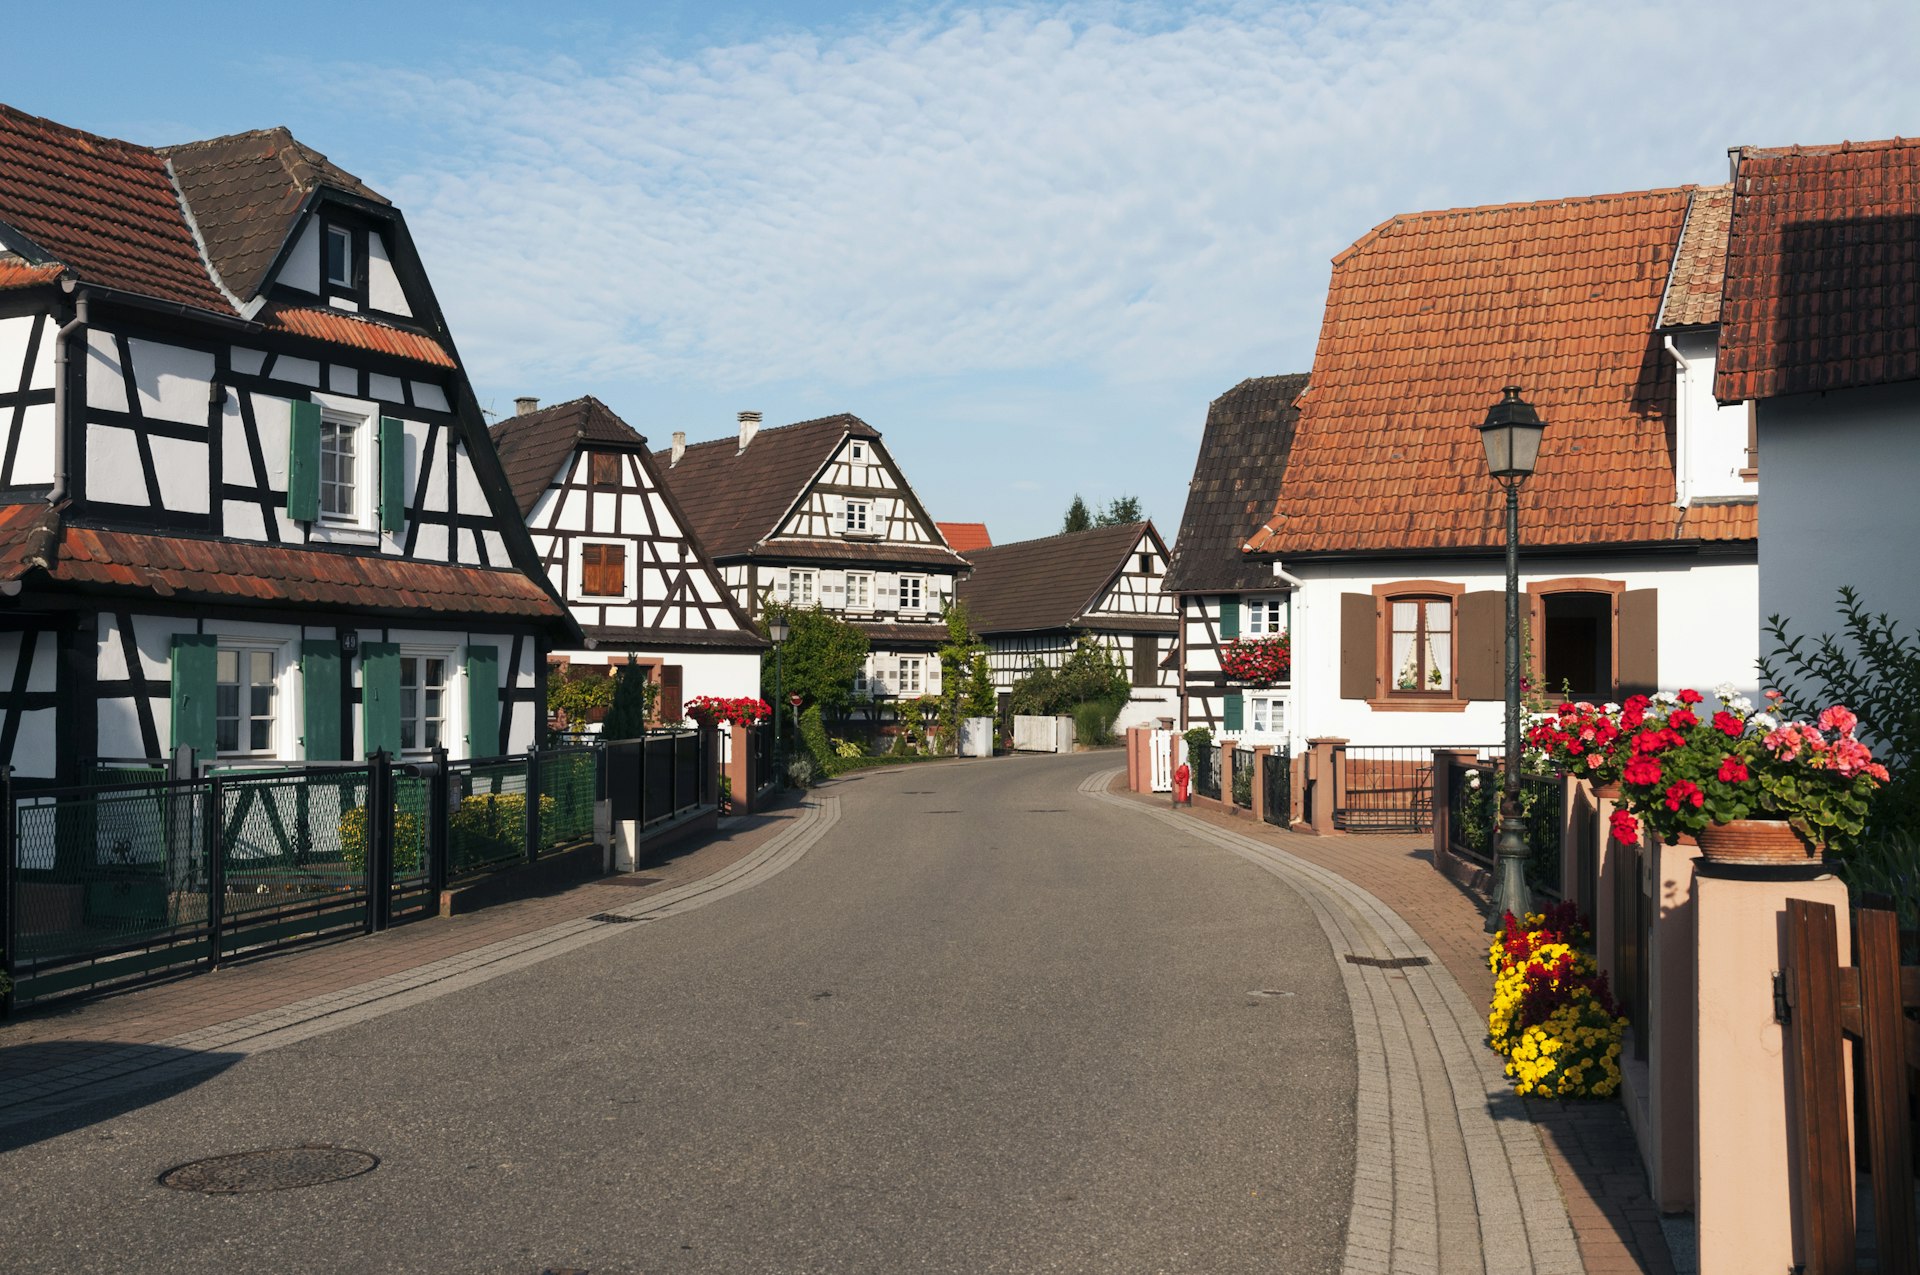 Street lined with half-timbered houses